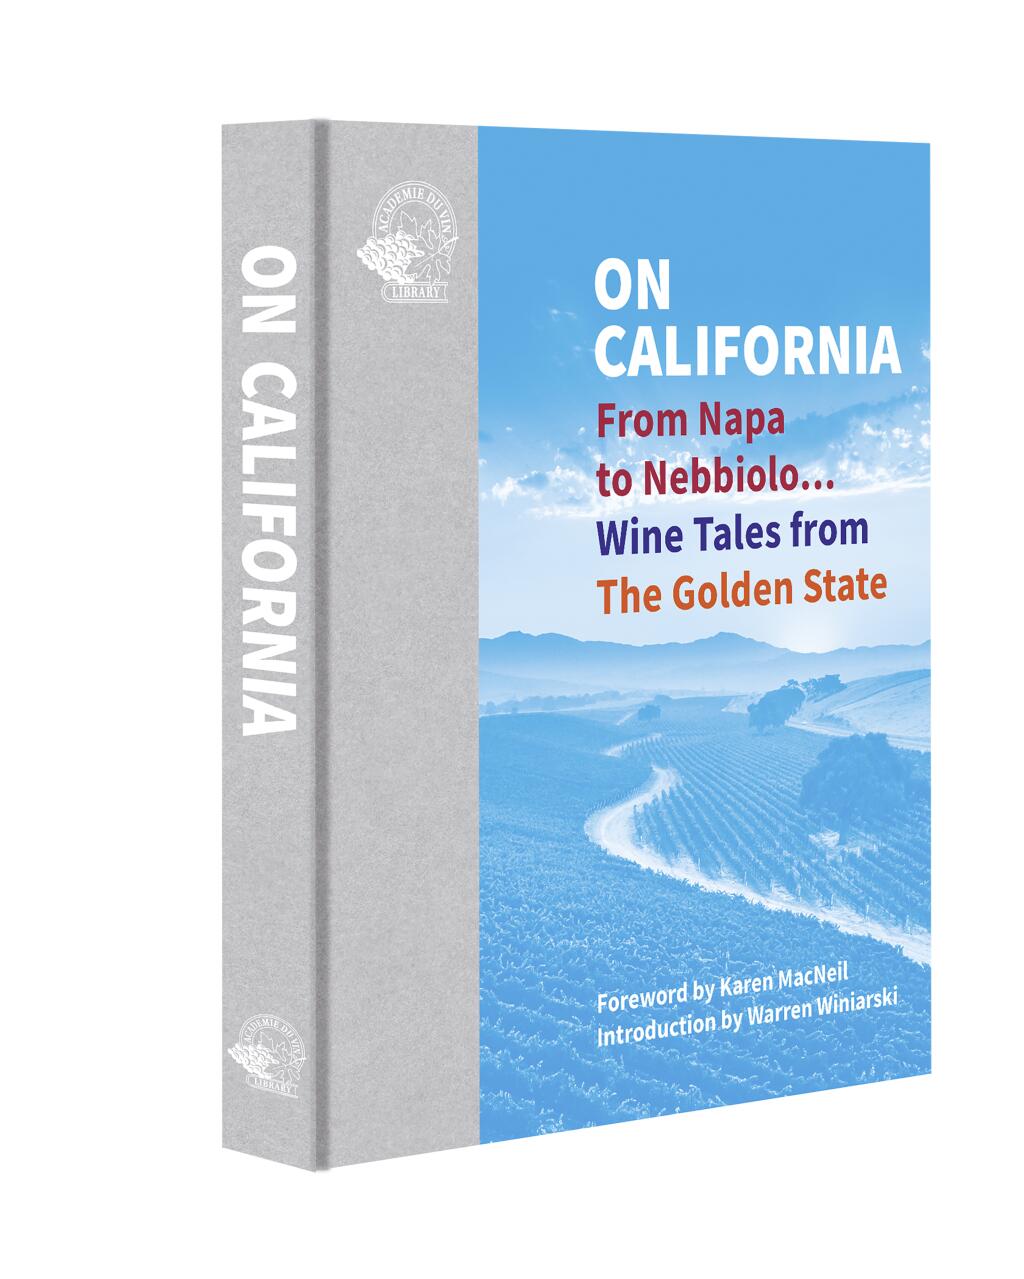 “On California” chronicles the challenges and triumphs of Golden State wine. (Academie du Vin Library)